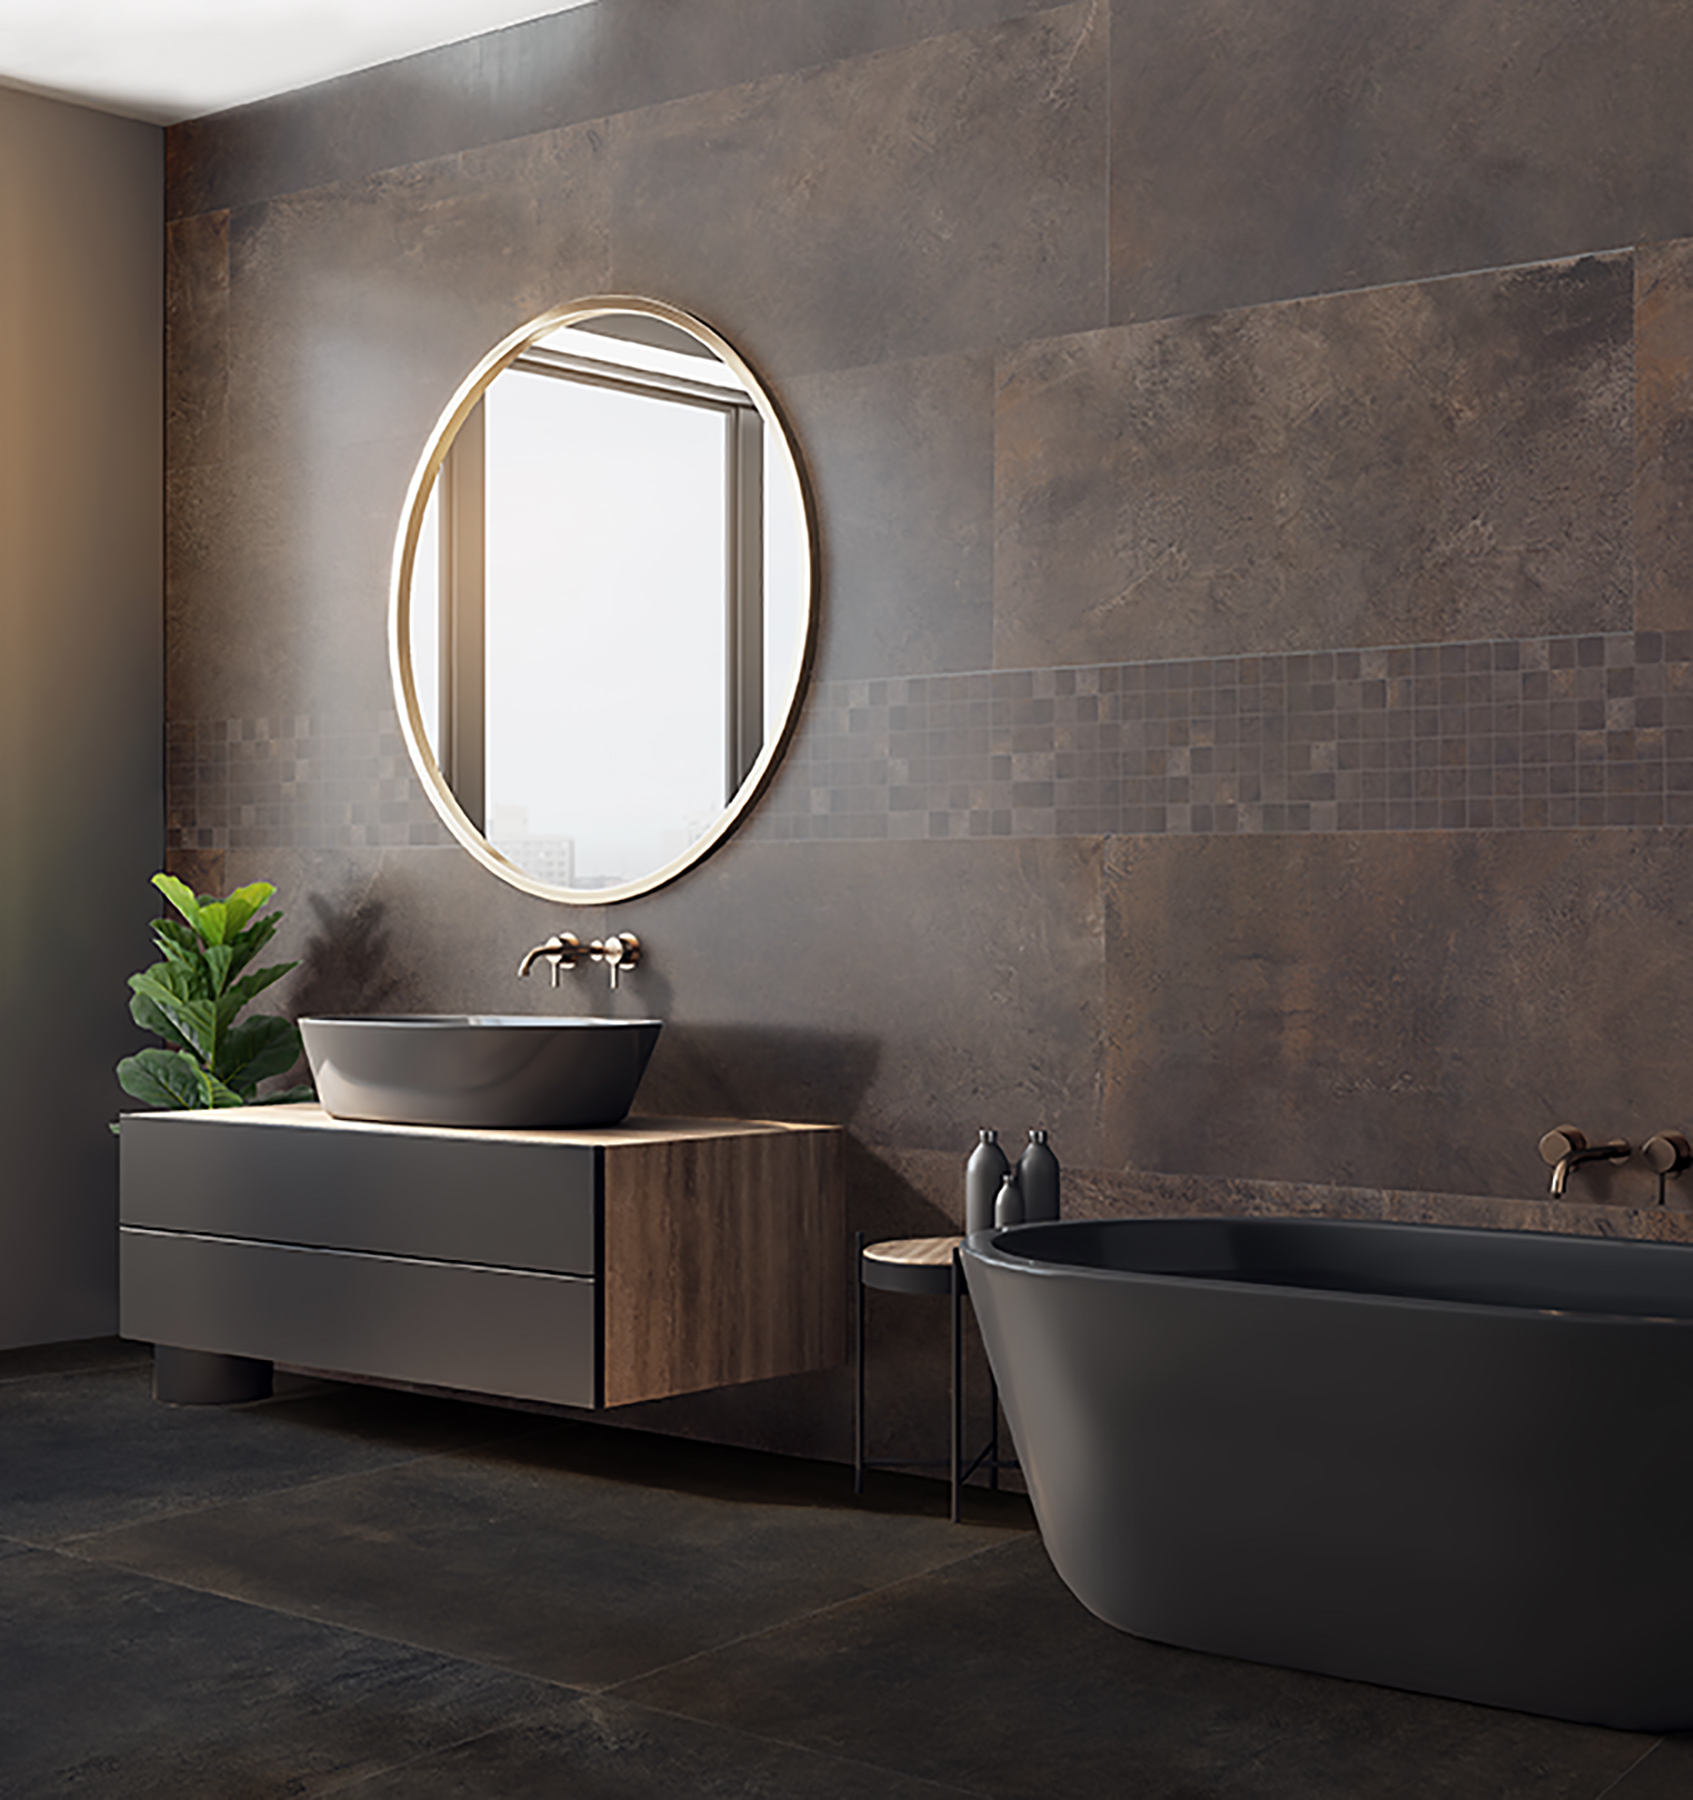 Side view of black orange bathroom interior with decorative tree, bath tub, sink, round mirror, sunlight and copy space. 3D Rendering